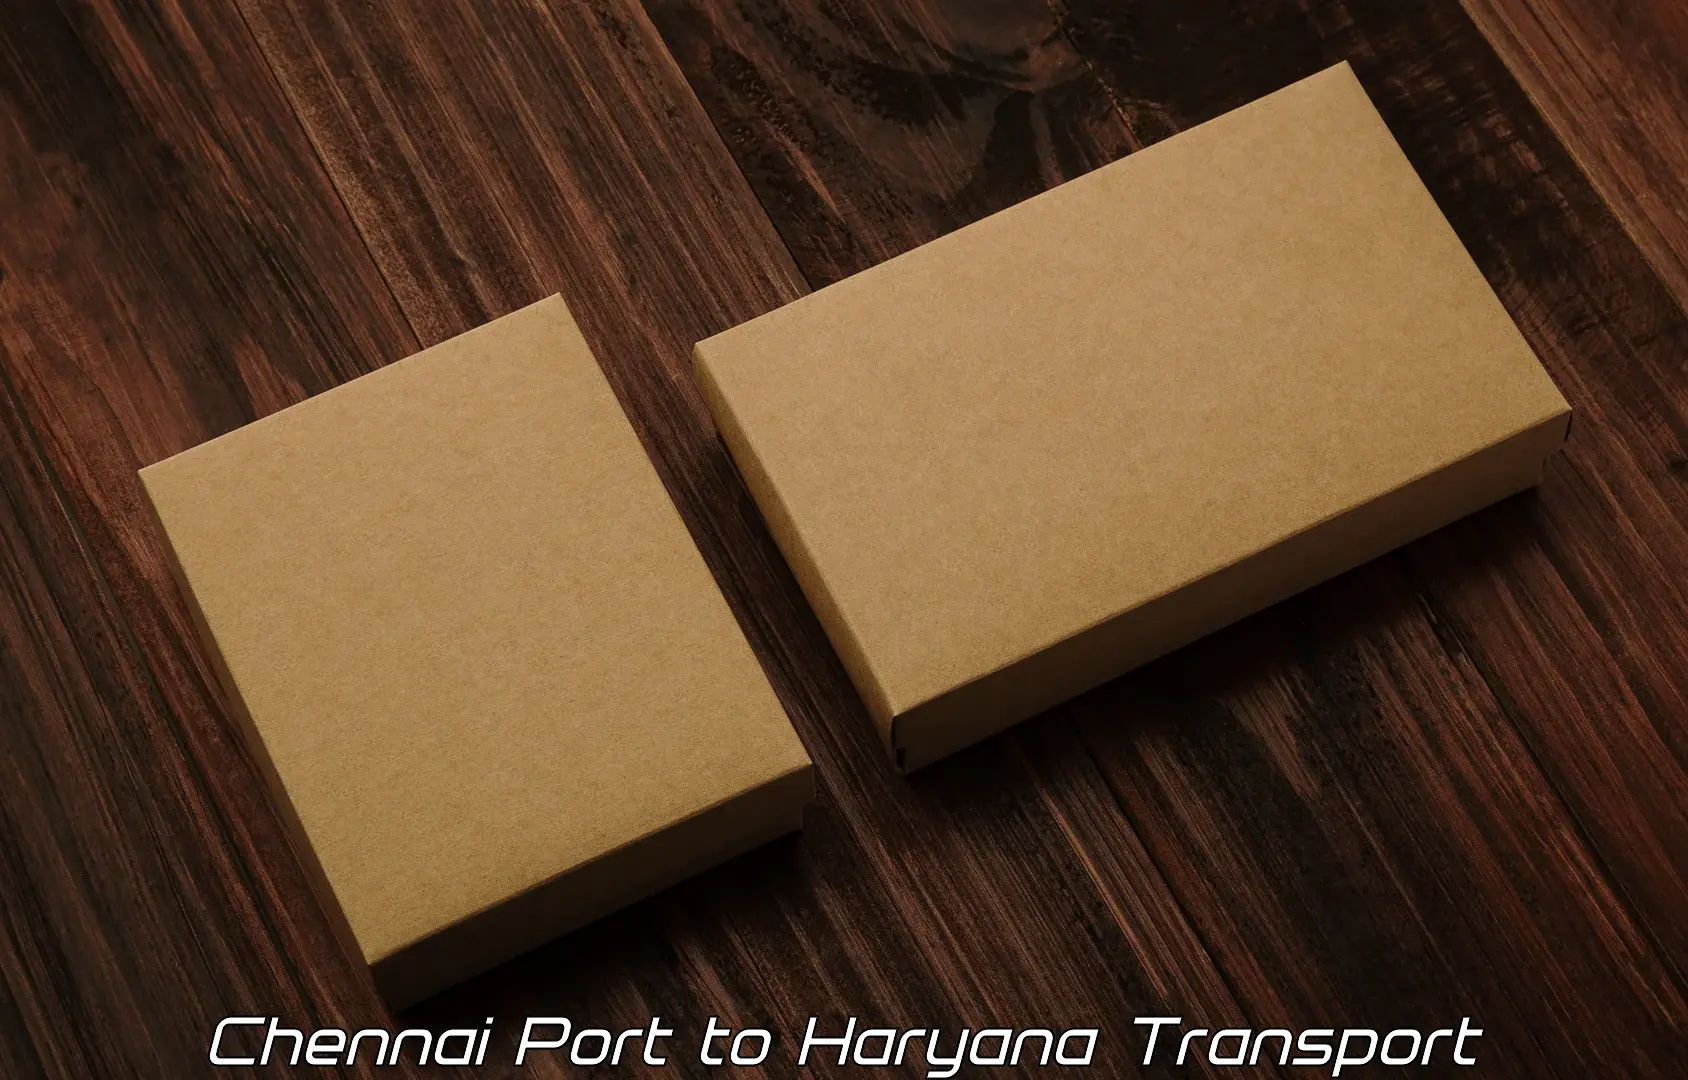 Container transport service Chennai Port to Faridabad